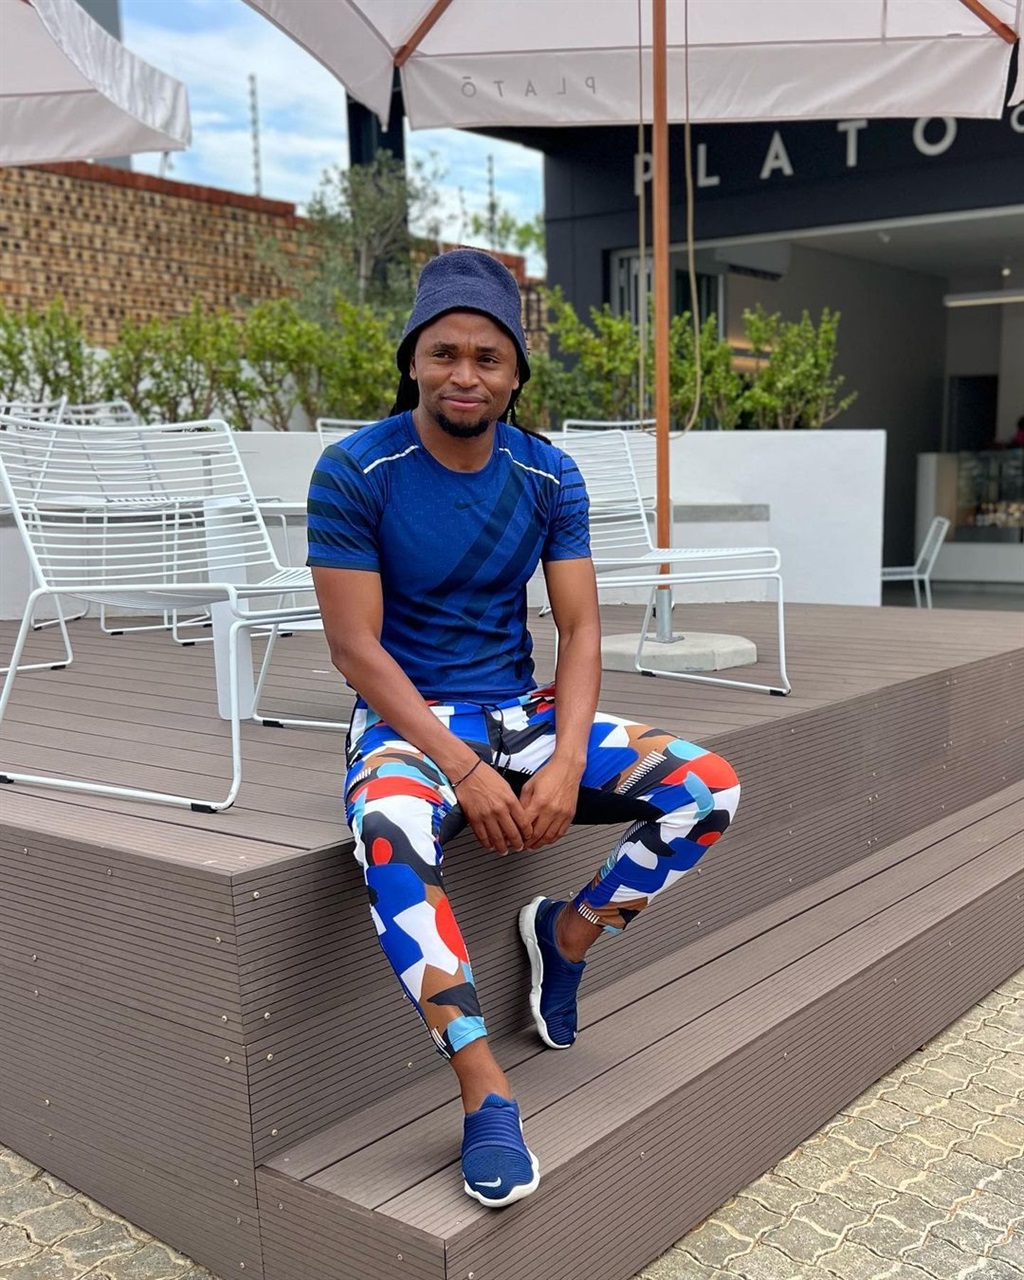 Siphiwe Tshabalala revealed the staggeringly low a